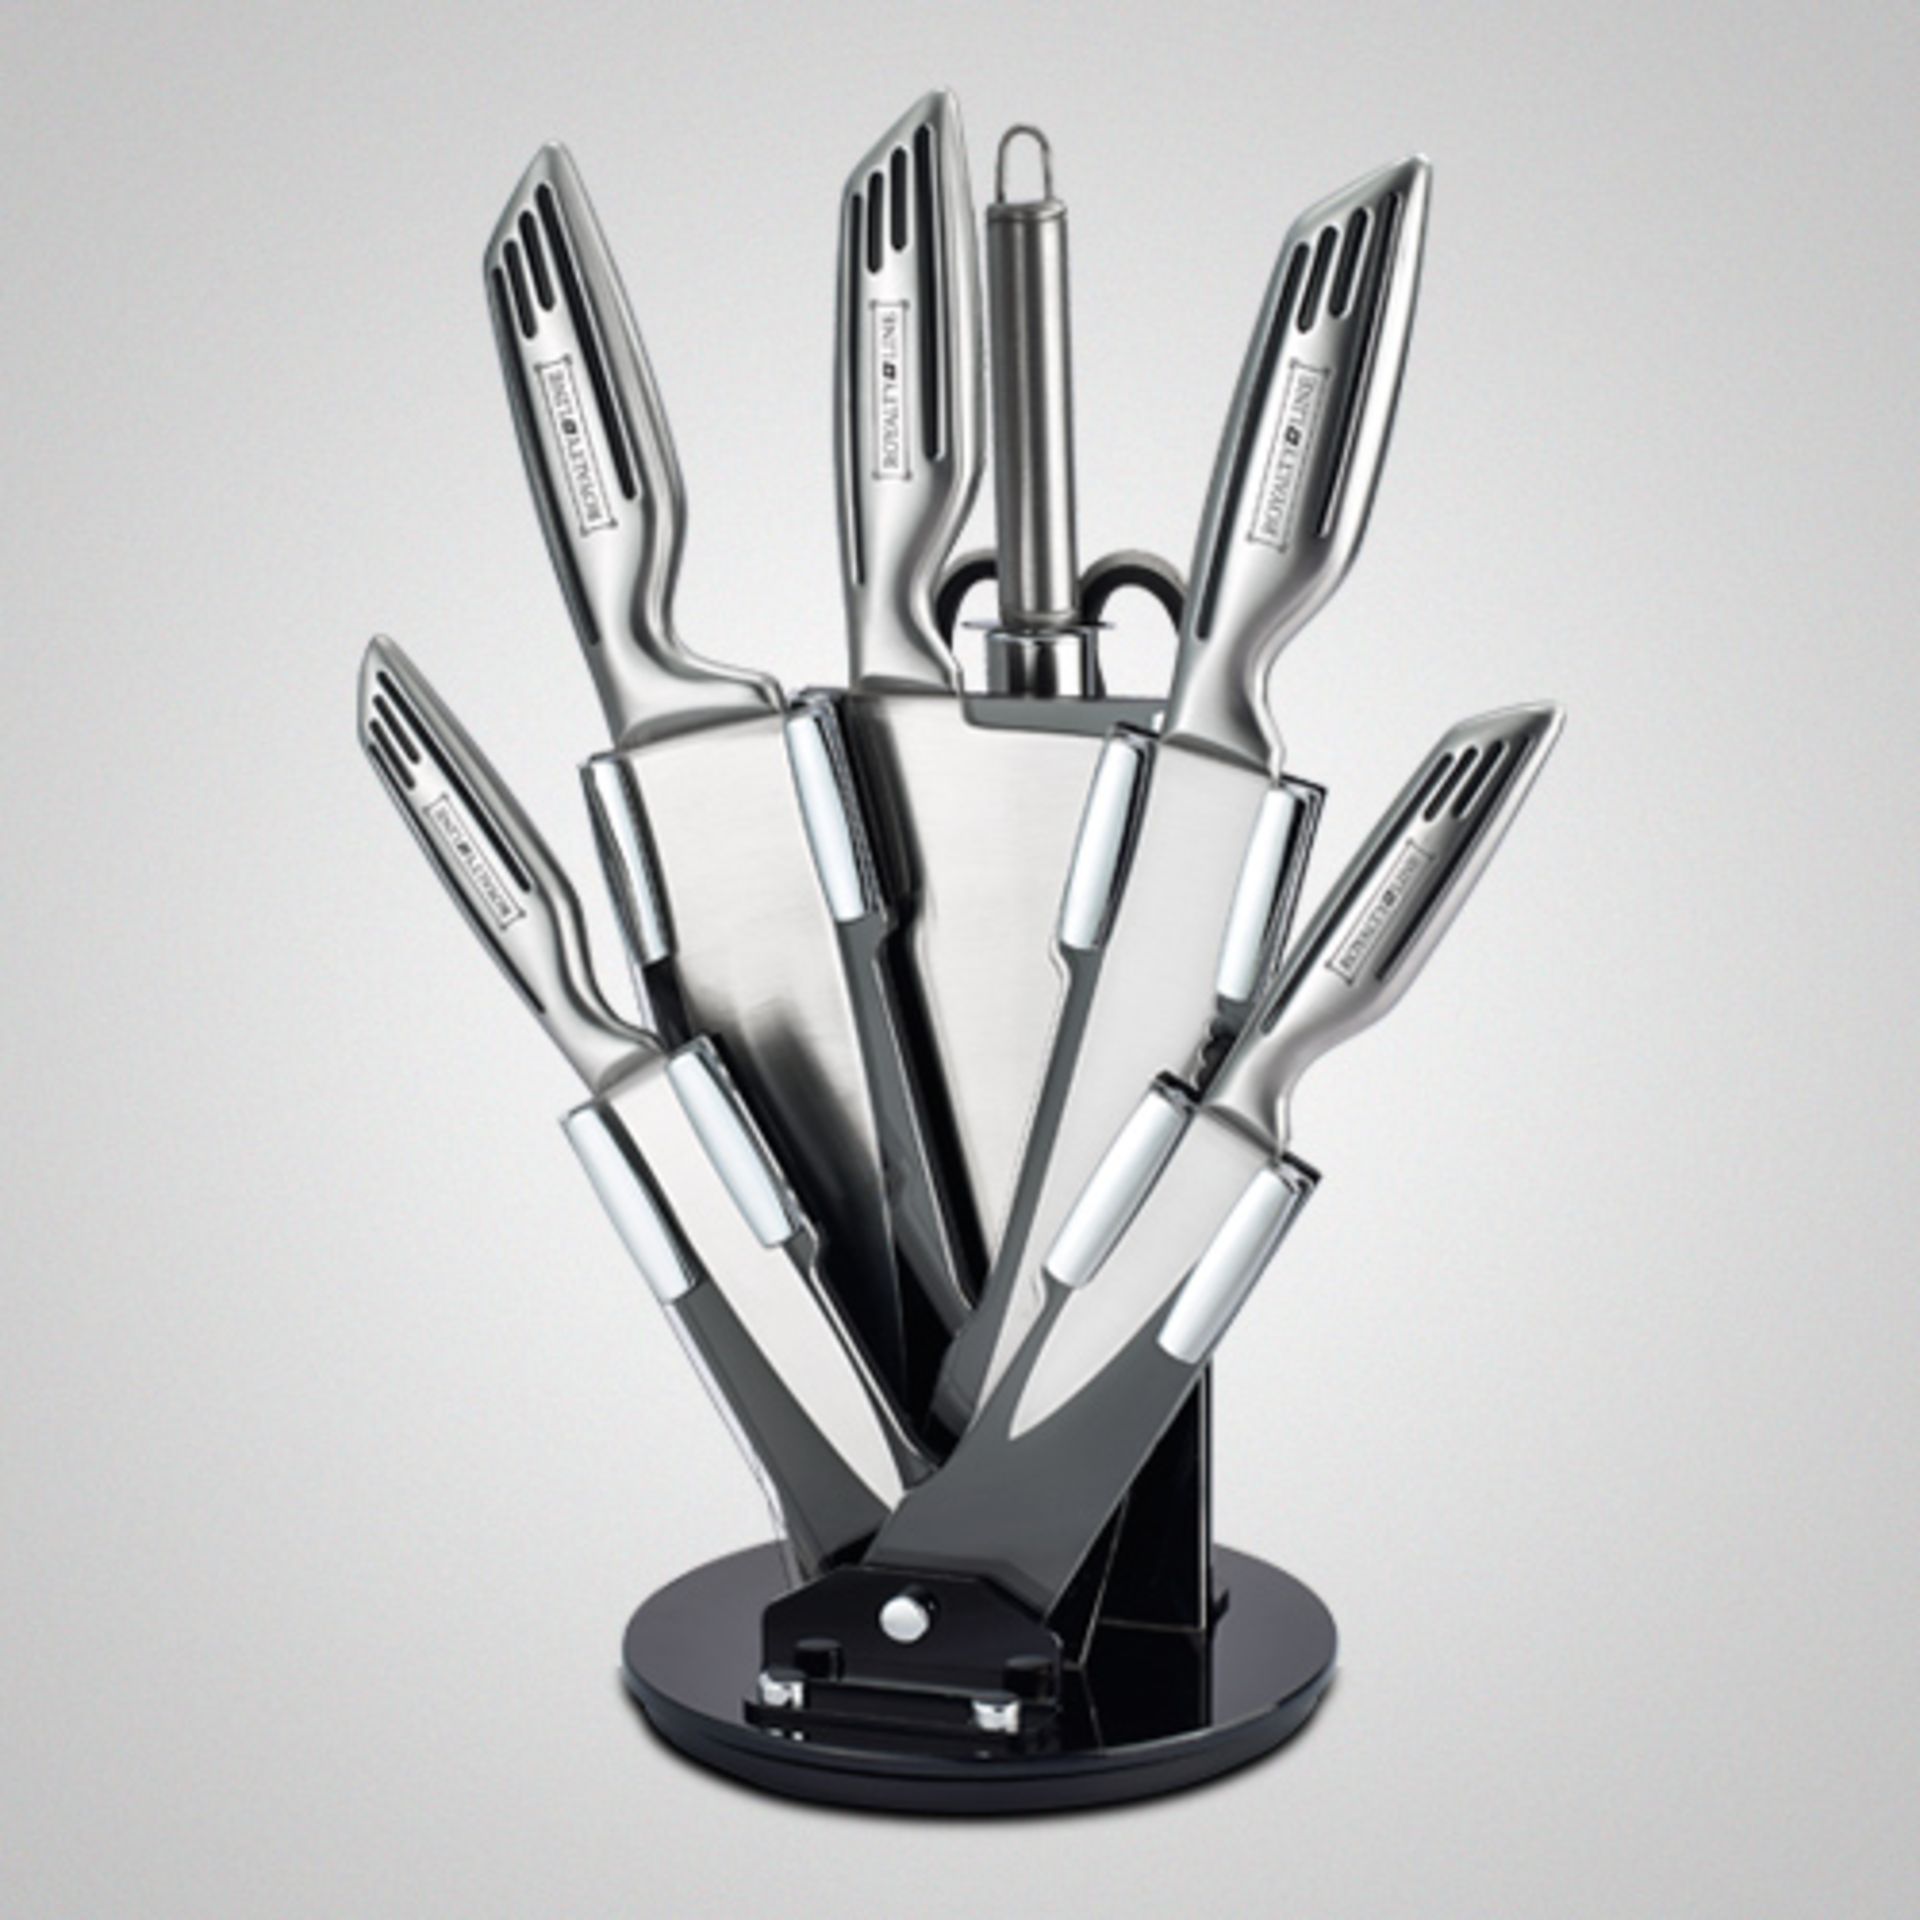 Royalty Stainless Steel Eight Piece Kitchen Knife Set RRP 99 euros - Image 2 of 2